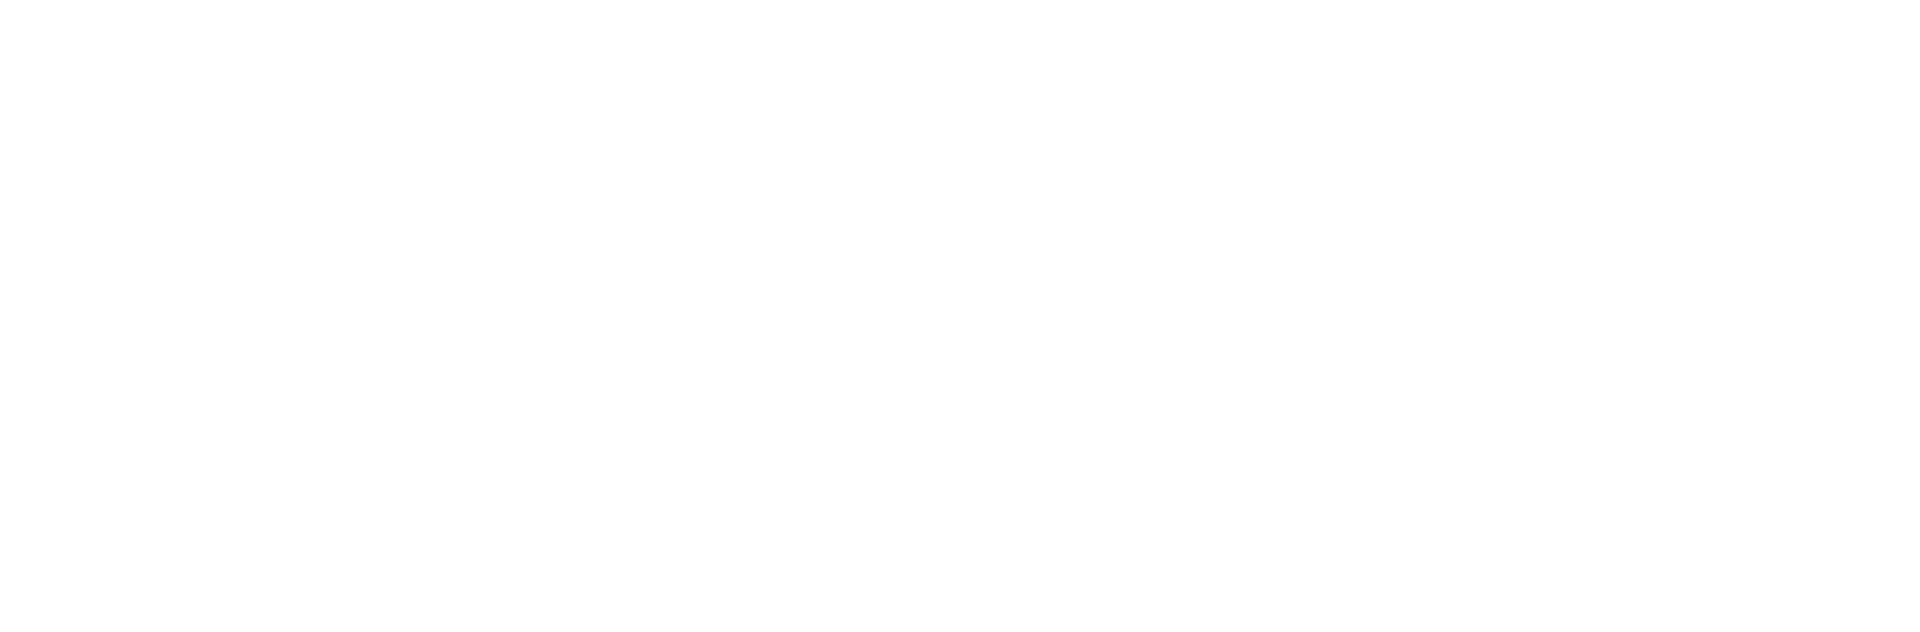 Best Sellers  Header Image Text Overlay